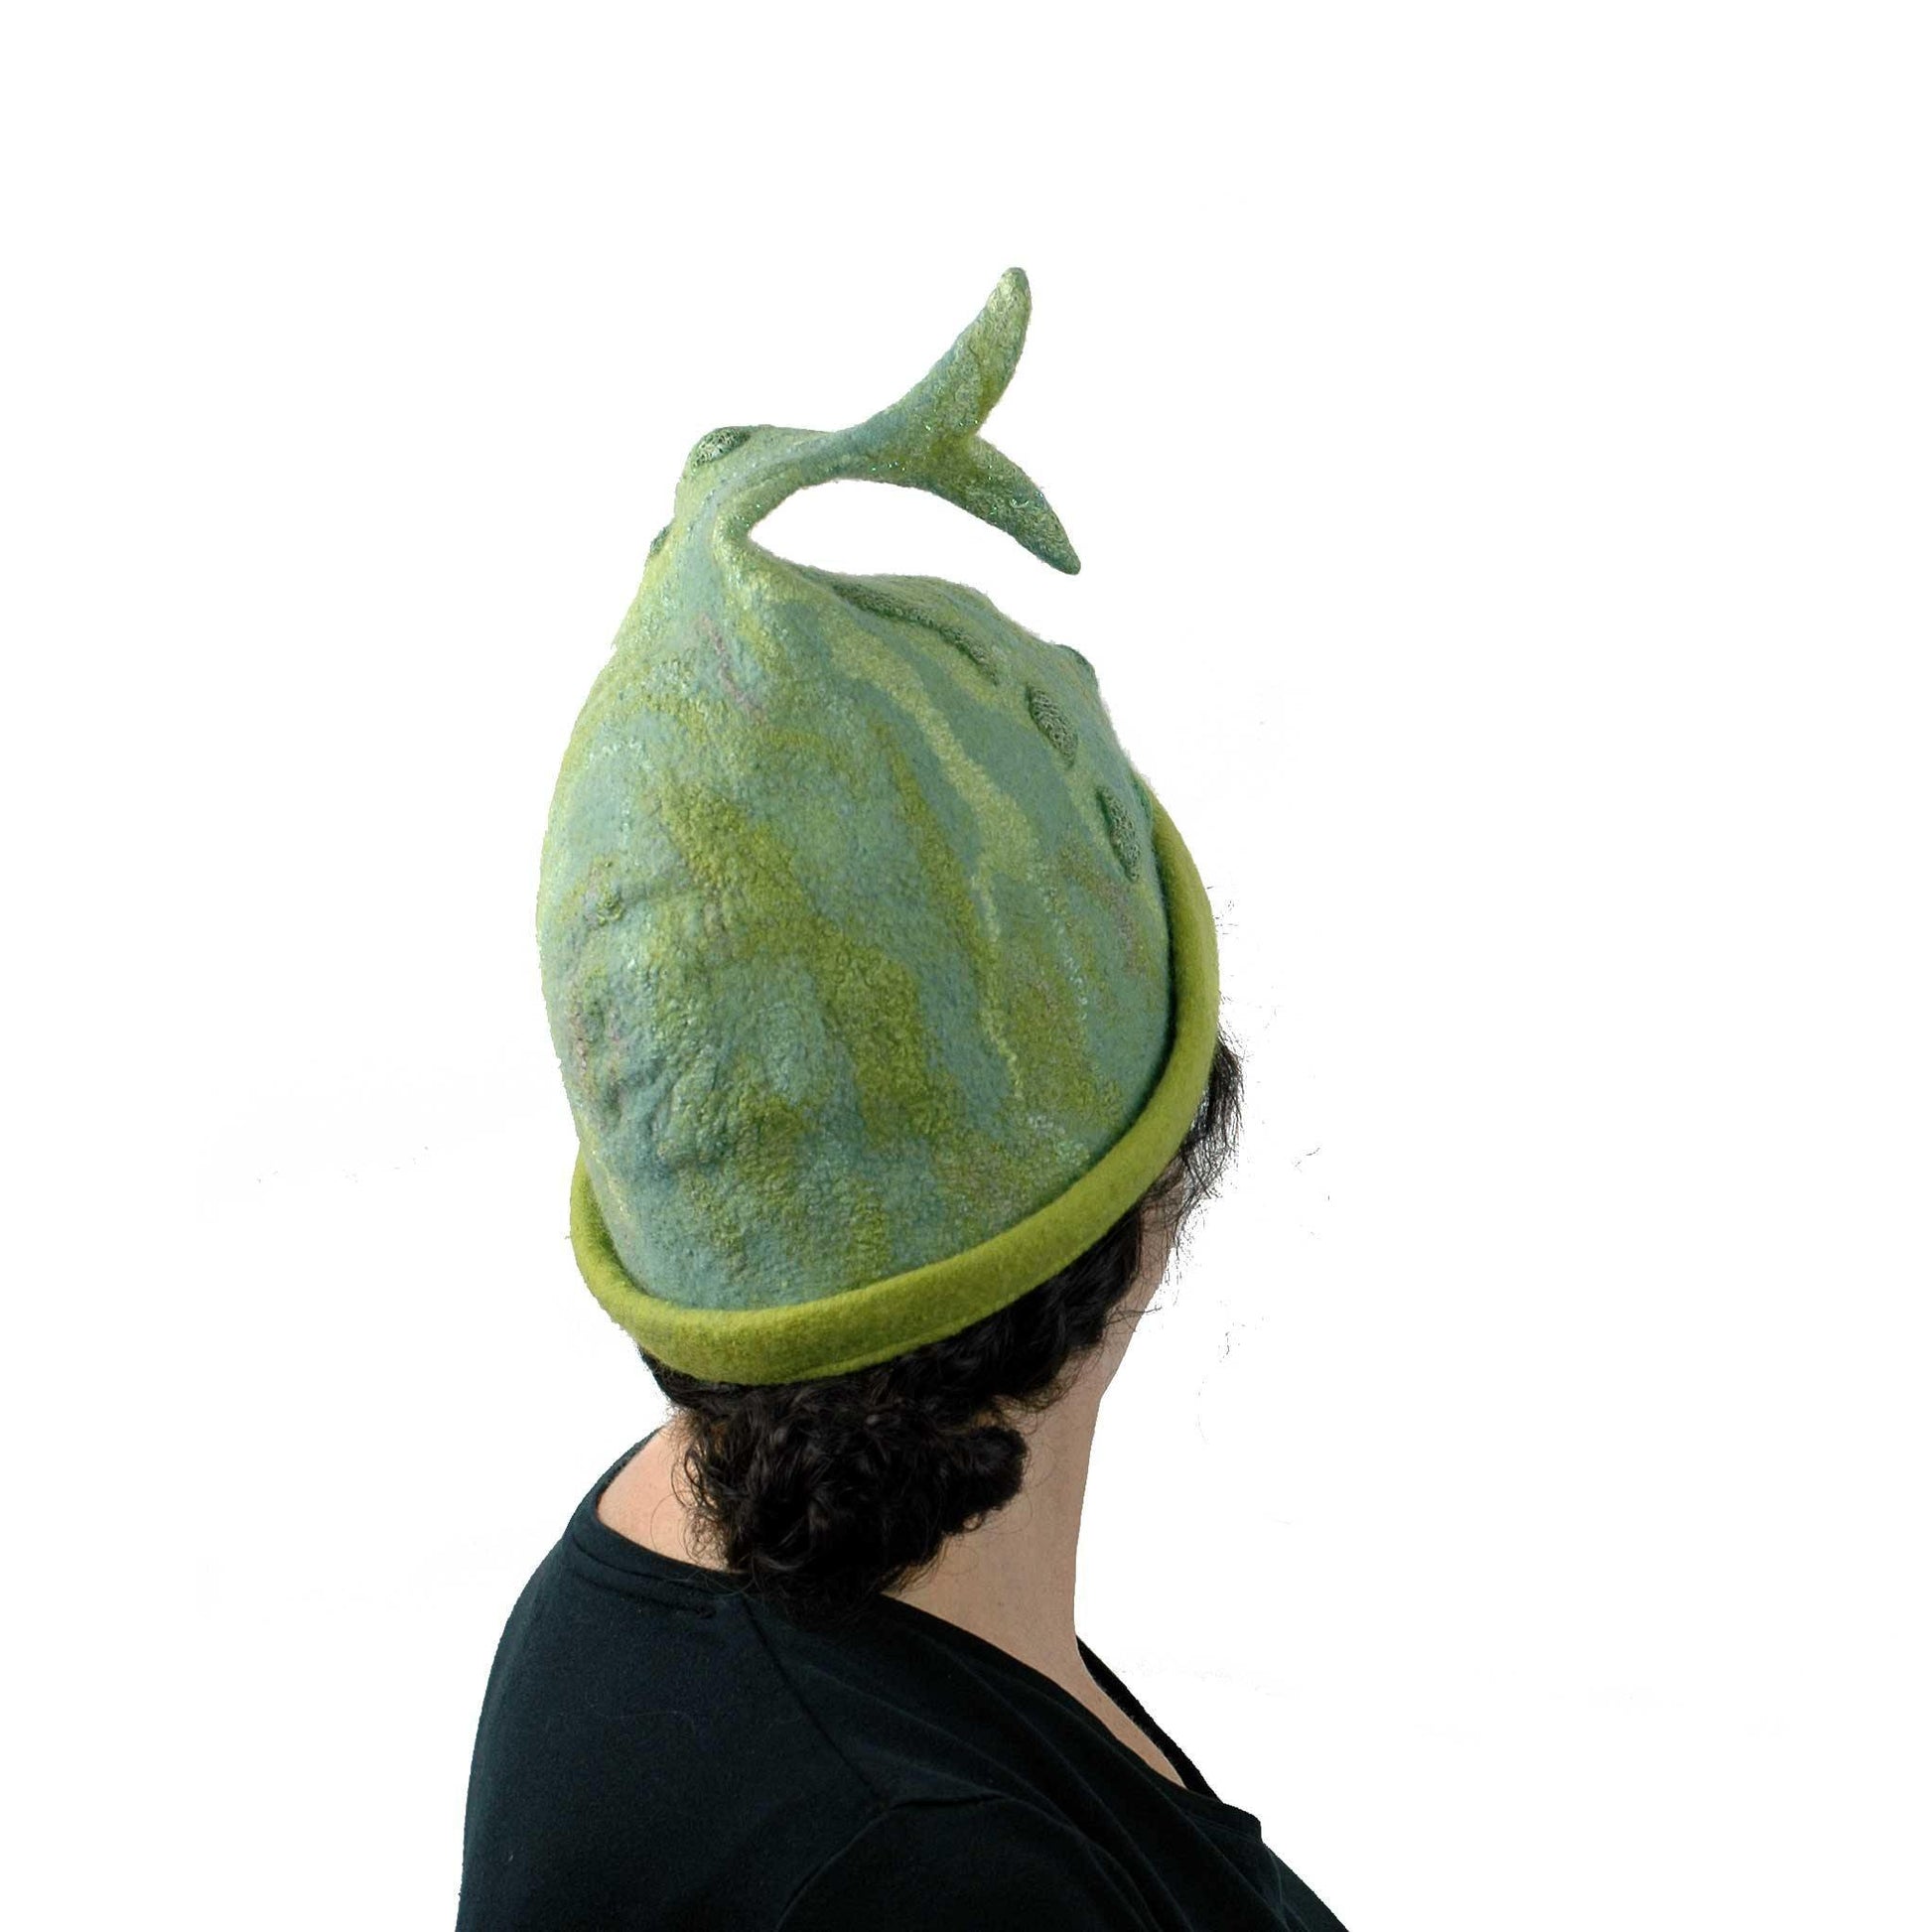 Felted Beanie Hat in Lime Green Wool - Large Size - backview